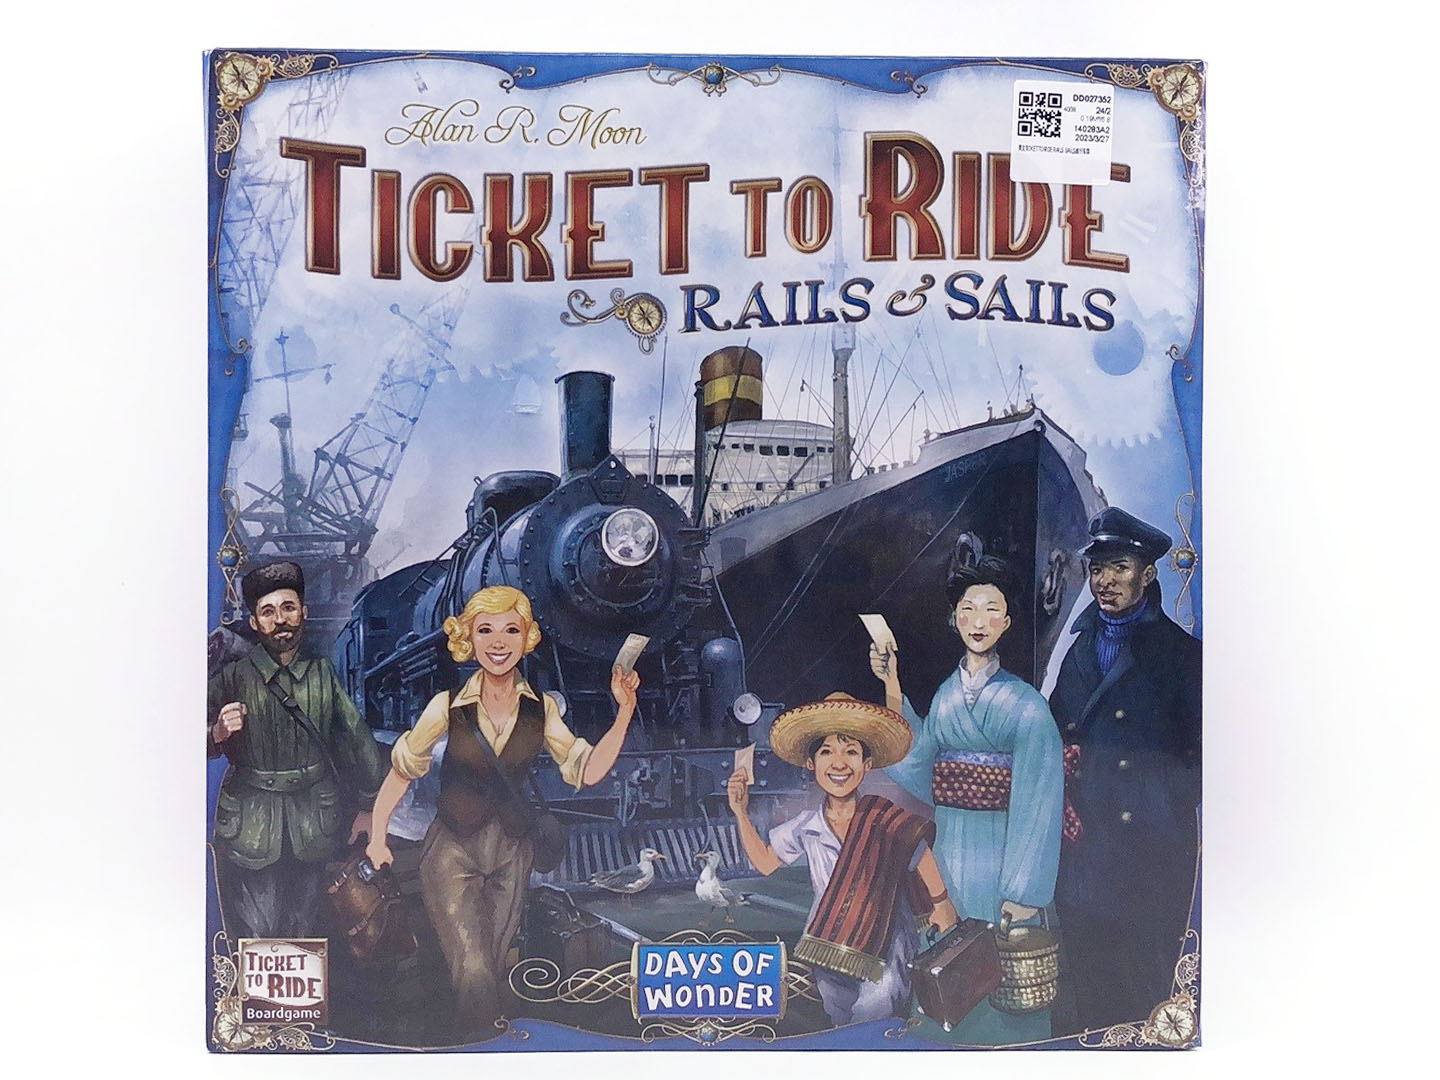 Ticket To Ride Rails Sails toys